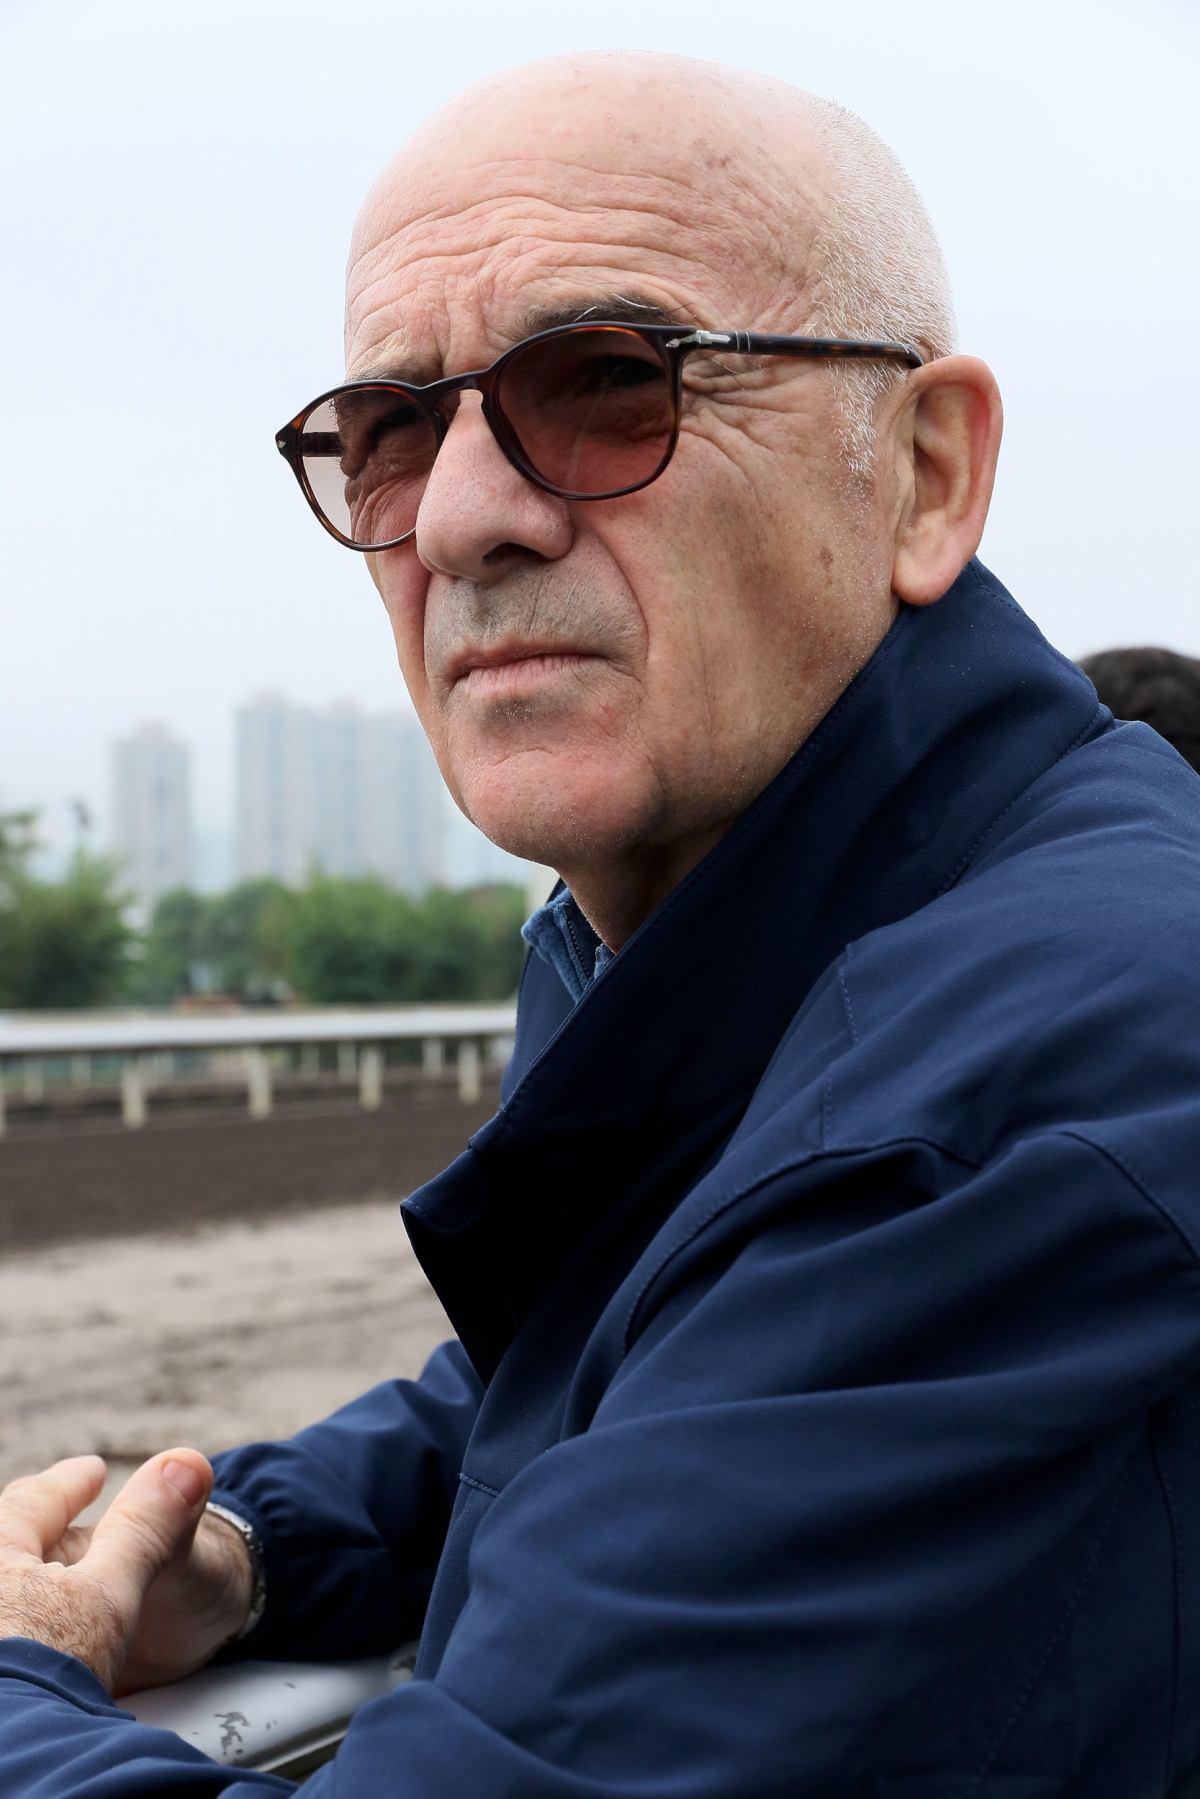 Alain de Royer-Dupre is one of the world’s finest trainers in history.